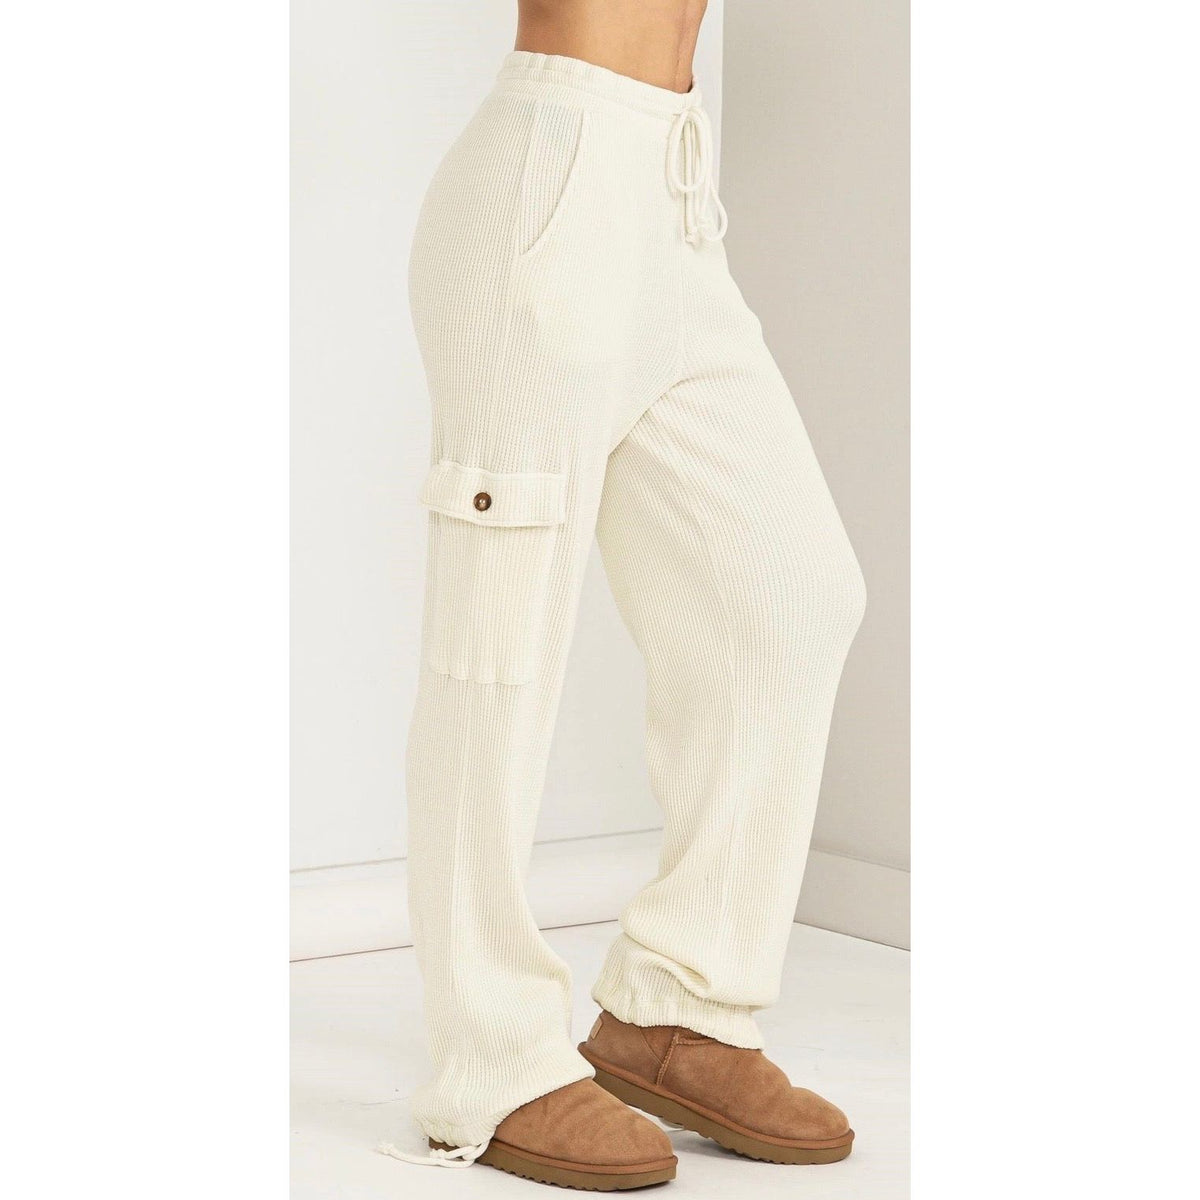 Nights At Home Cargo Pant (3 Colors)